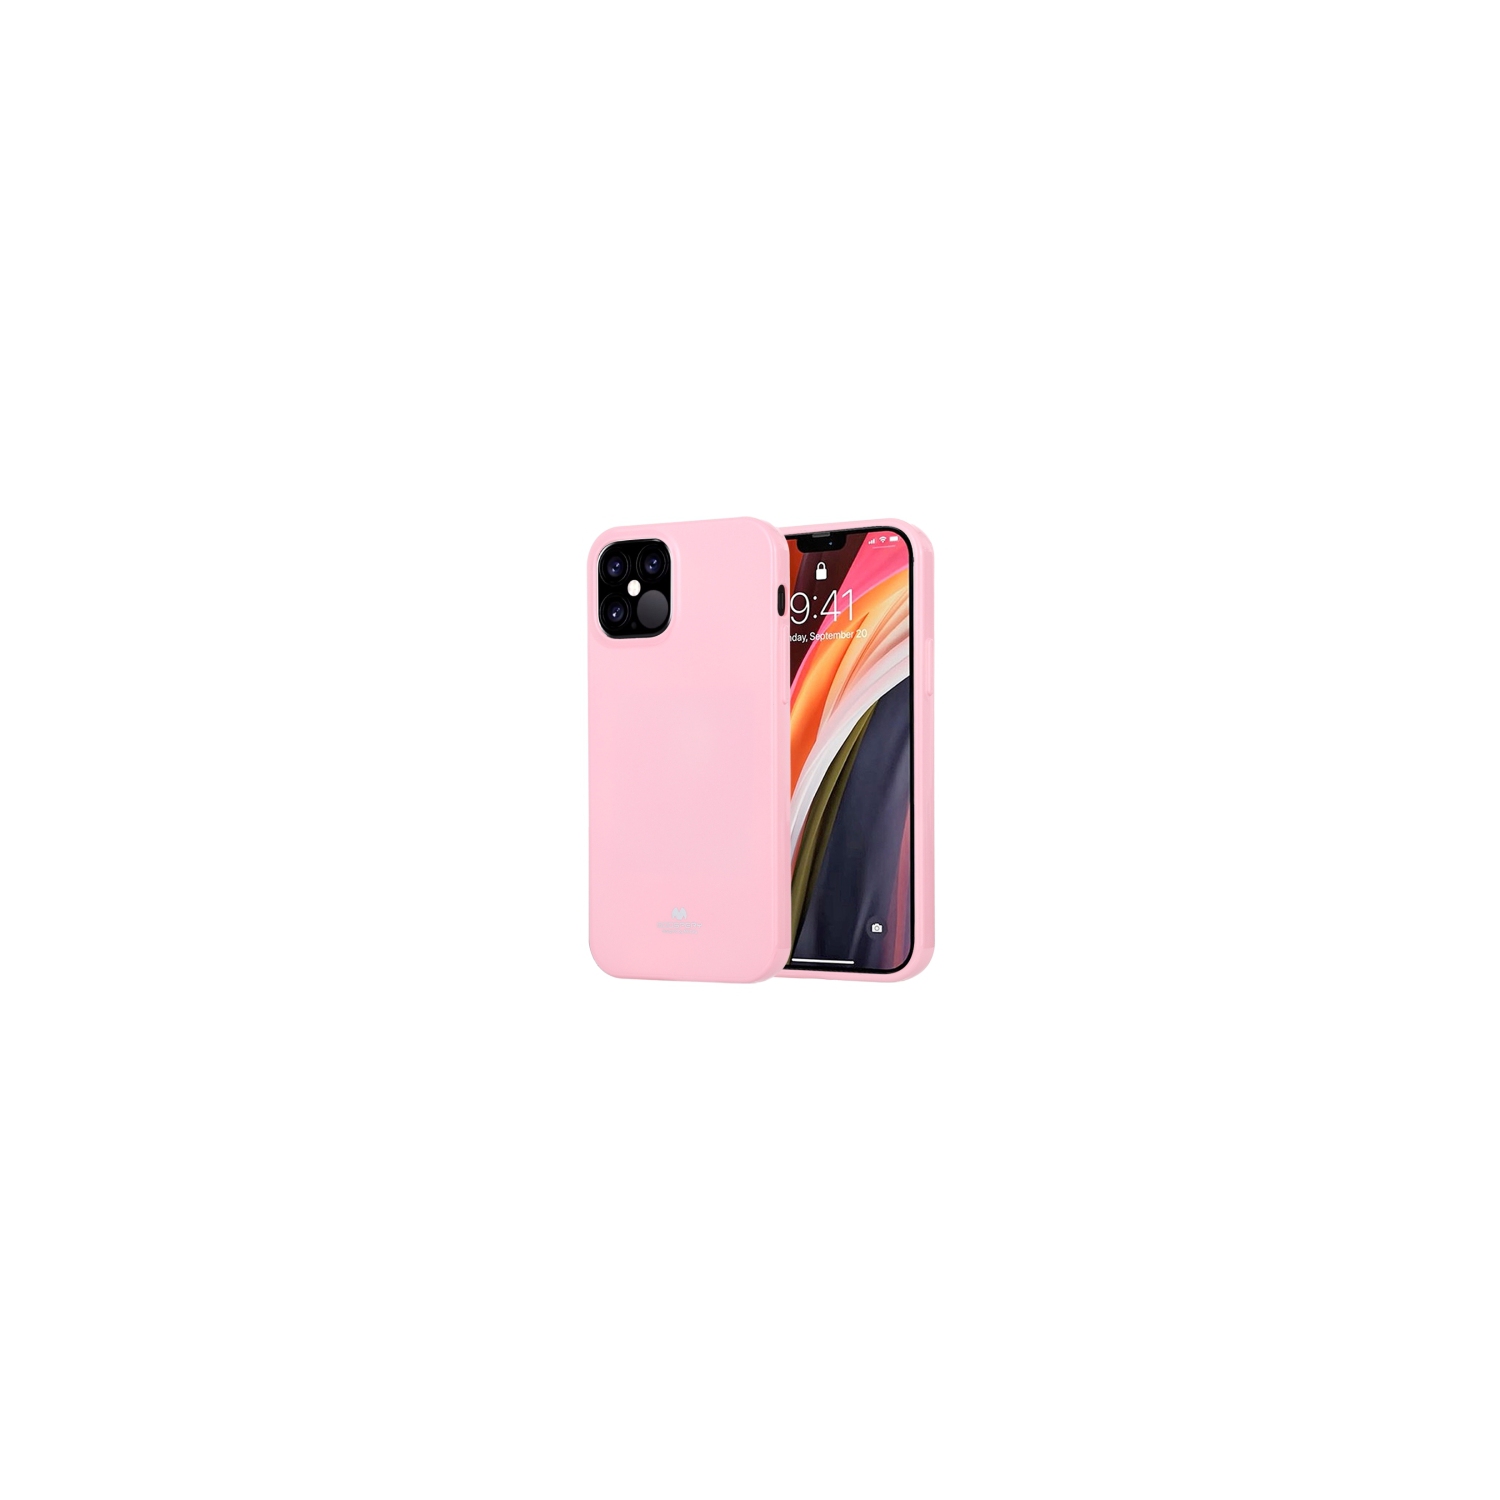 TopSave Goospery Pearl Jelly Slim Thin Rubber Case For Iphone 13 Pro Max(6.7"), Baby Pink